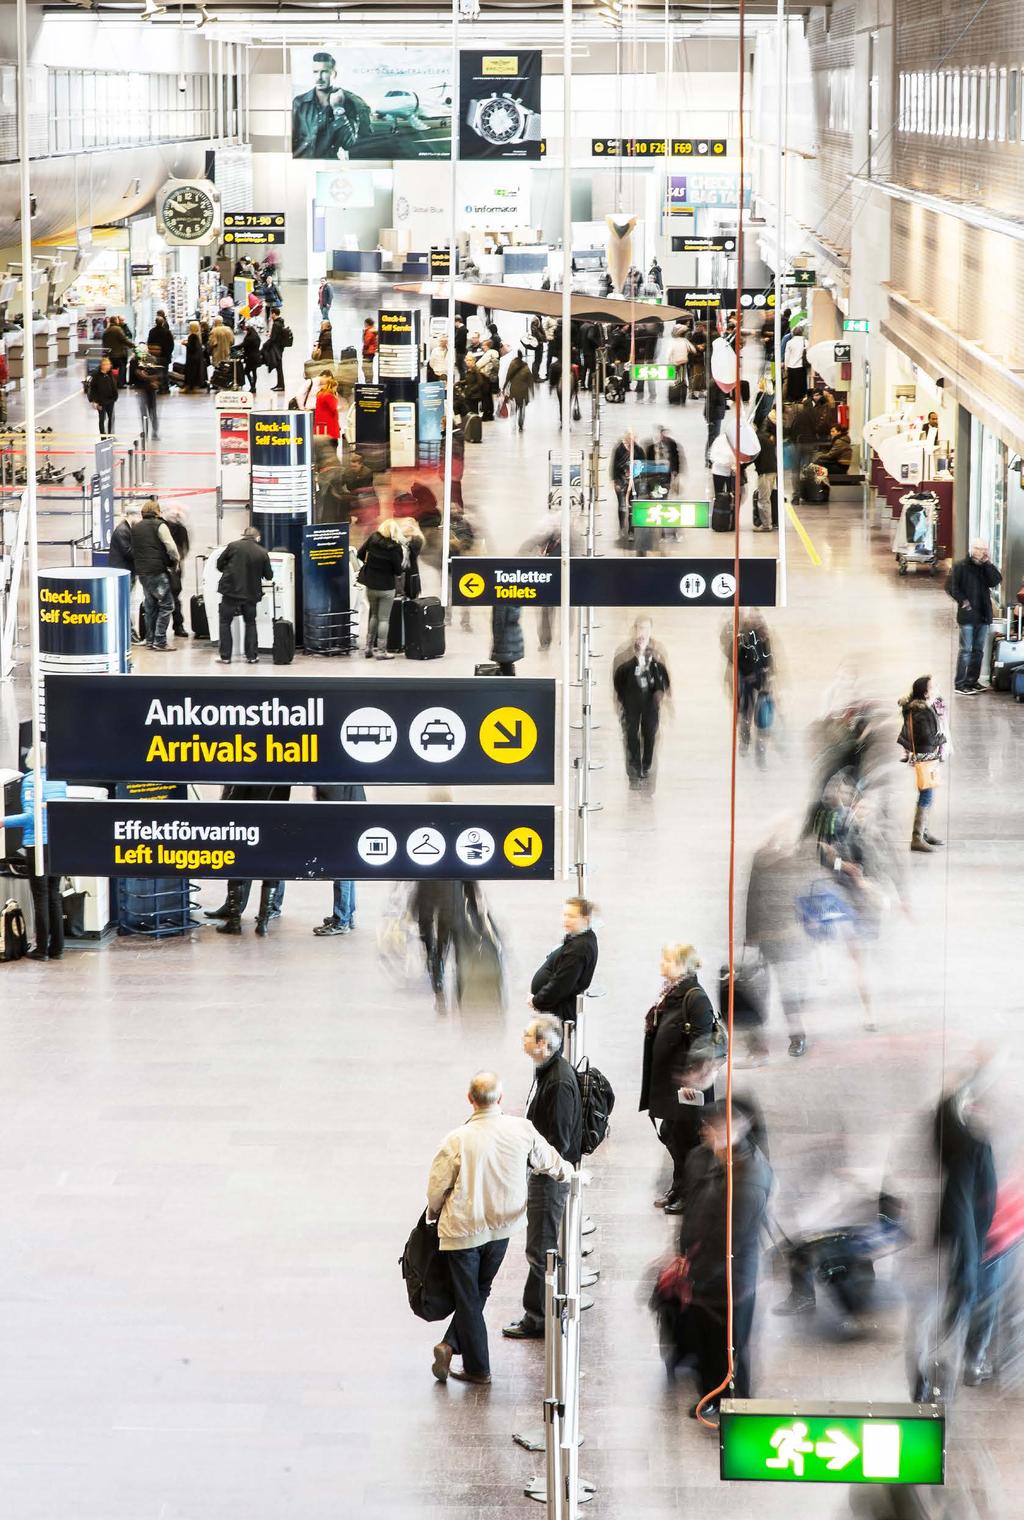 Airport Advertising Airports are positively charged environments that signal exclusivity, excitement and expectations, and the majority of the travelers are receptive to change and belong to a market